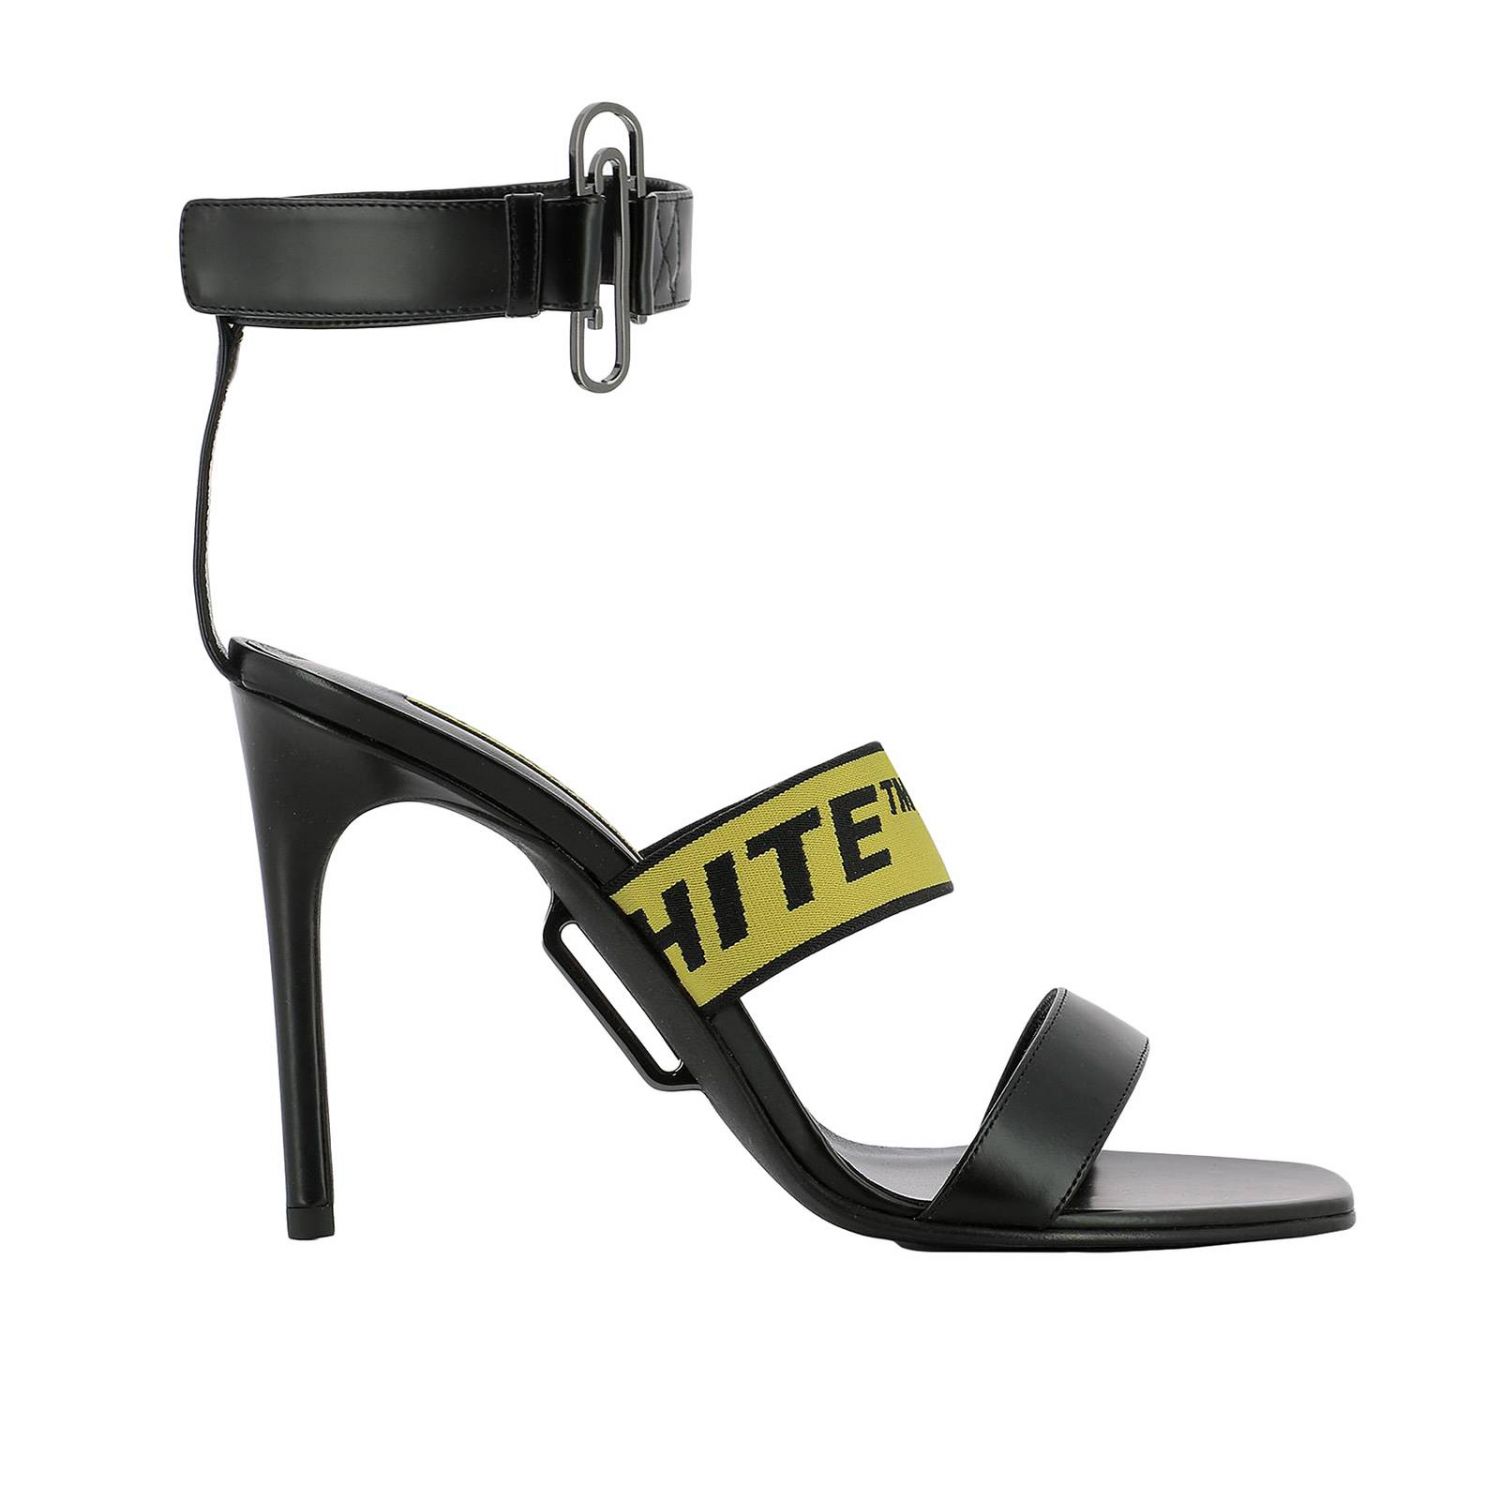 off white heel shoes